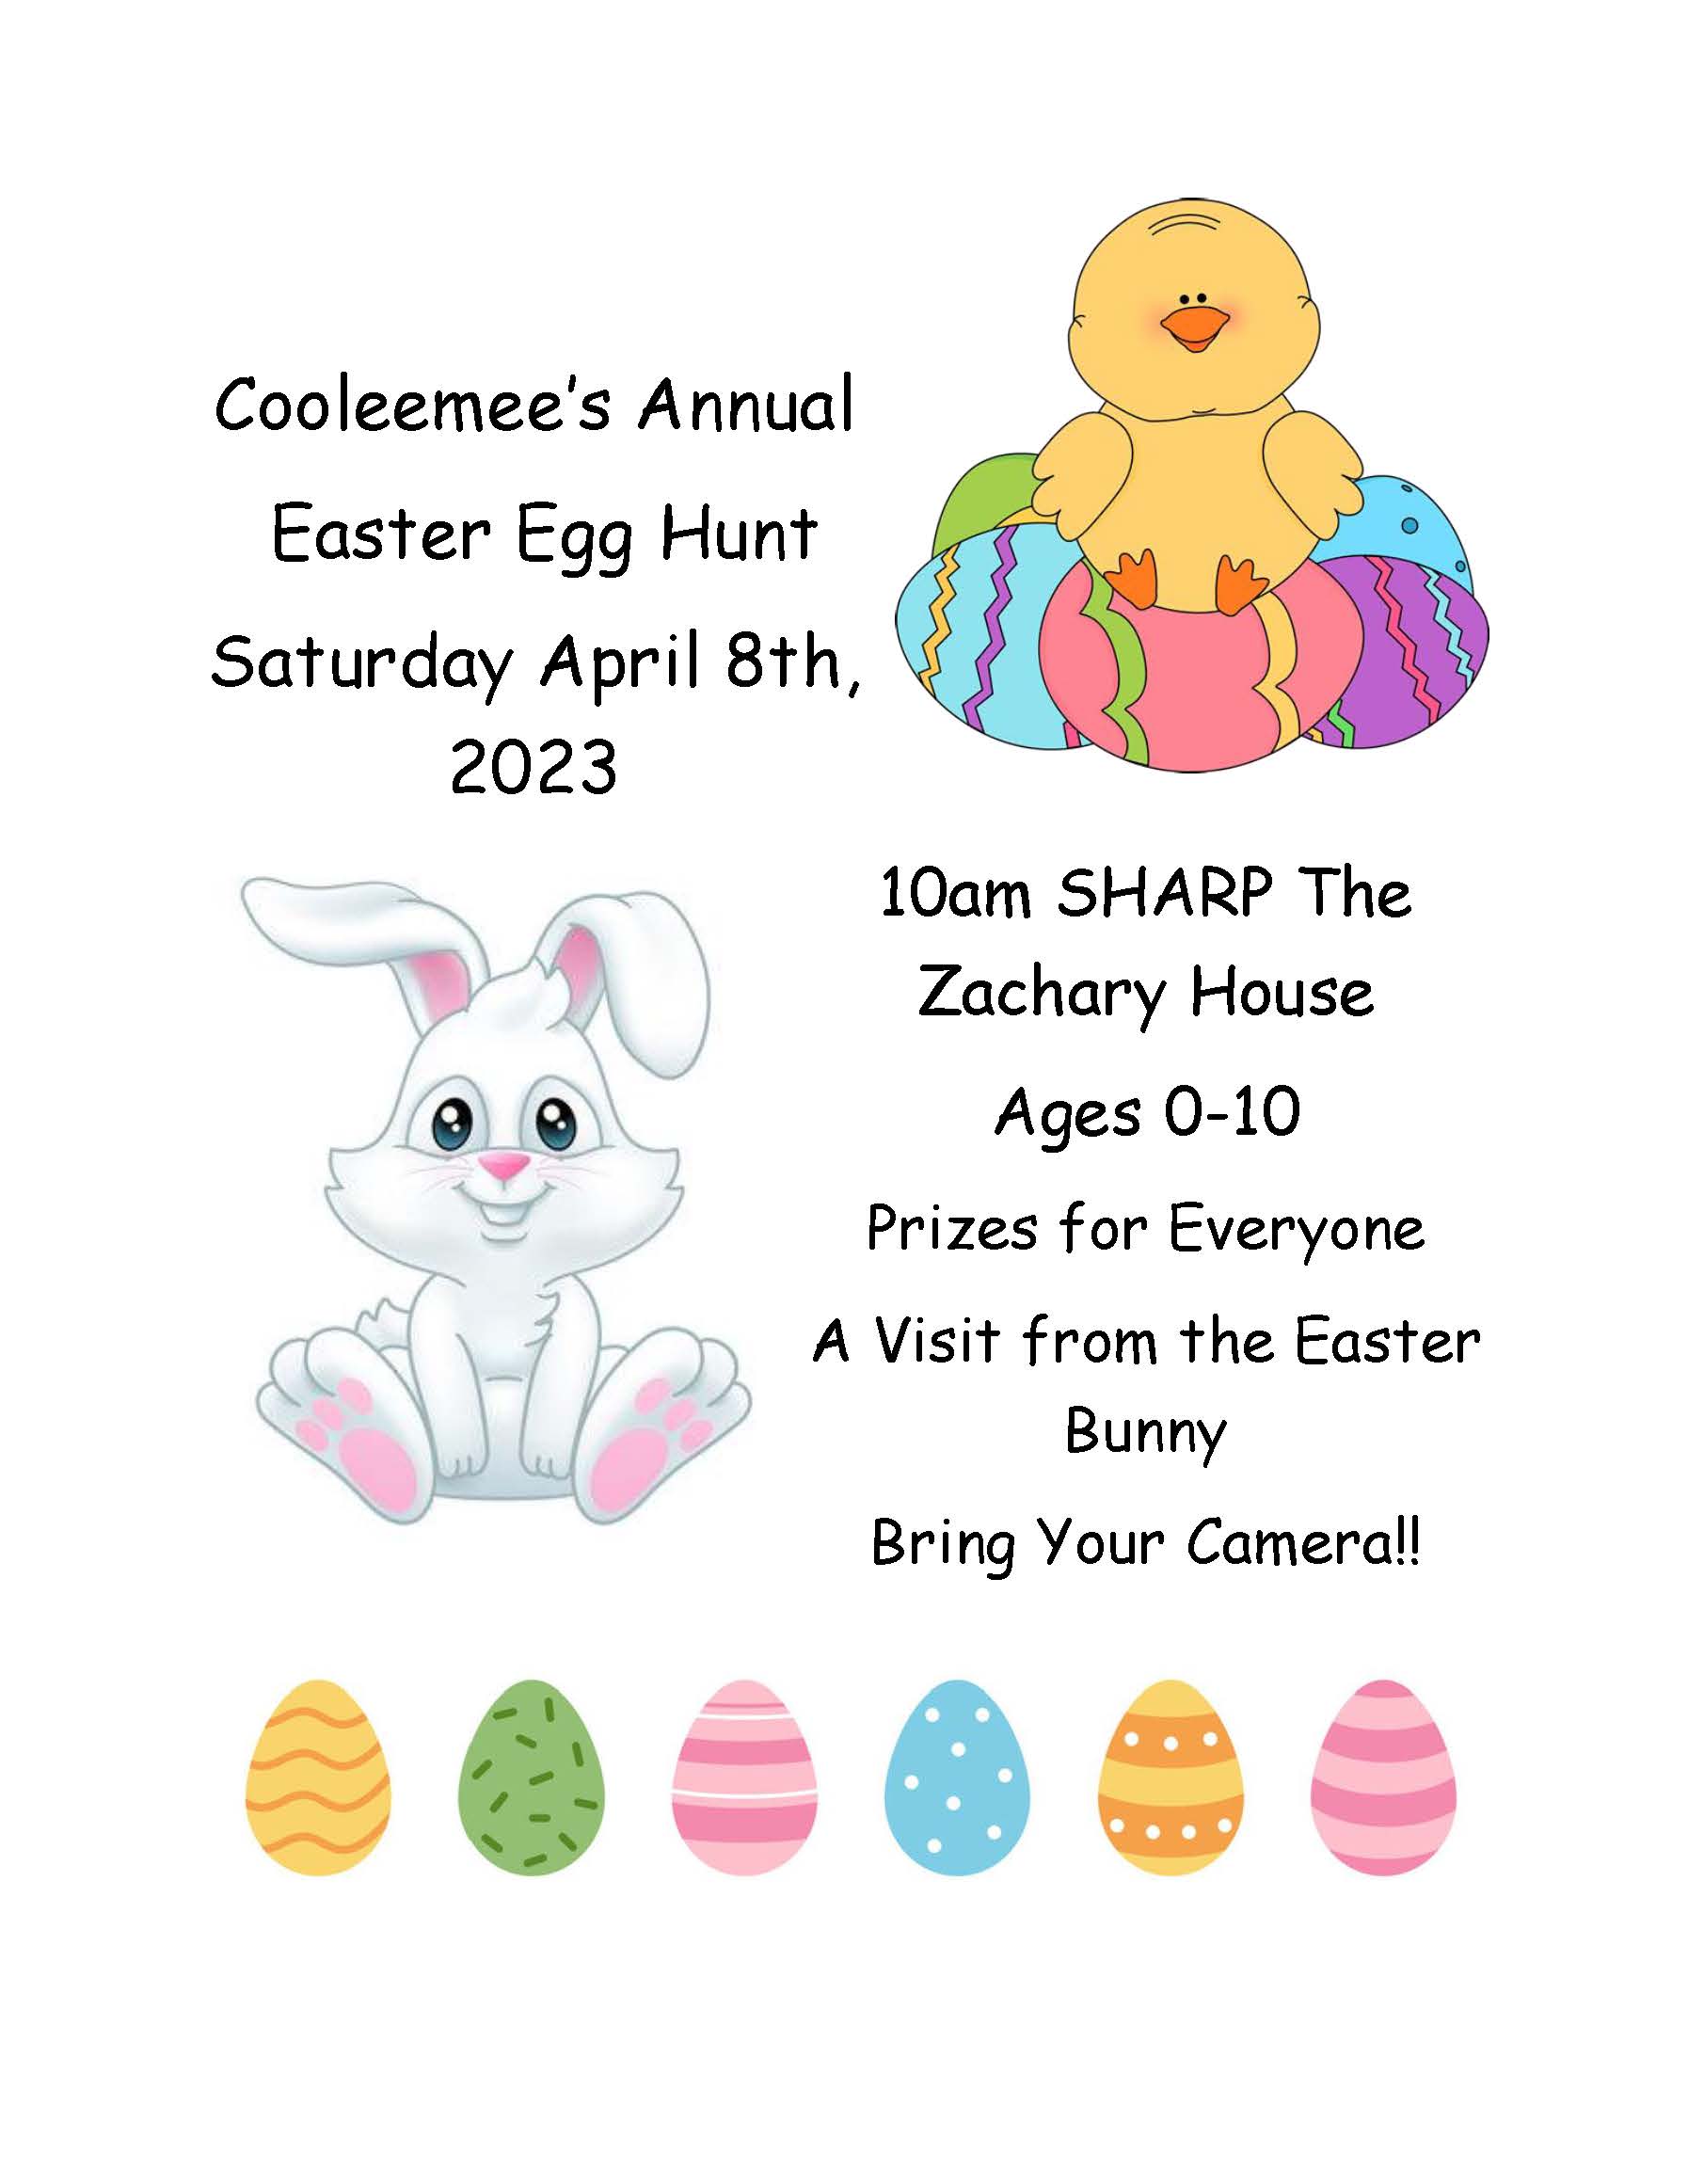 Cooleemee Easter Egg Hunt on Saturday, April 8th - Town of Cooleemee